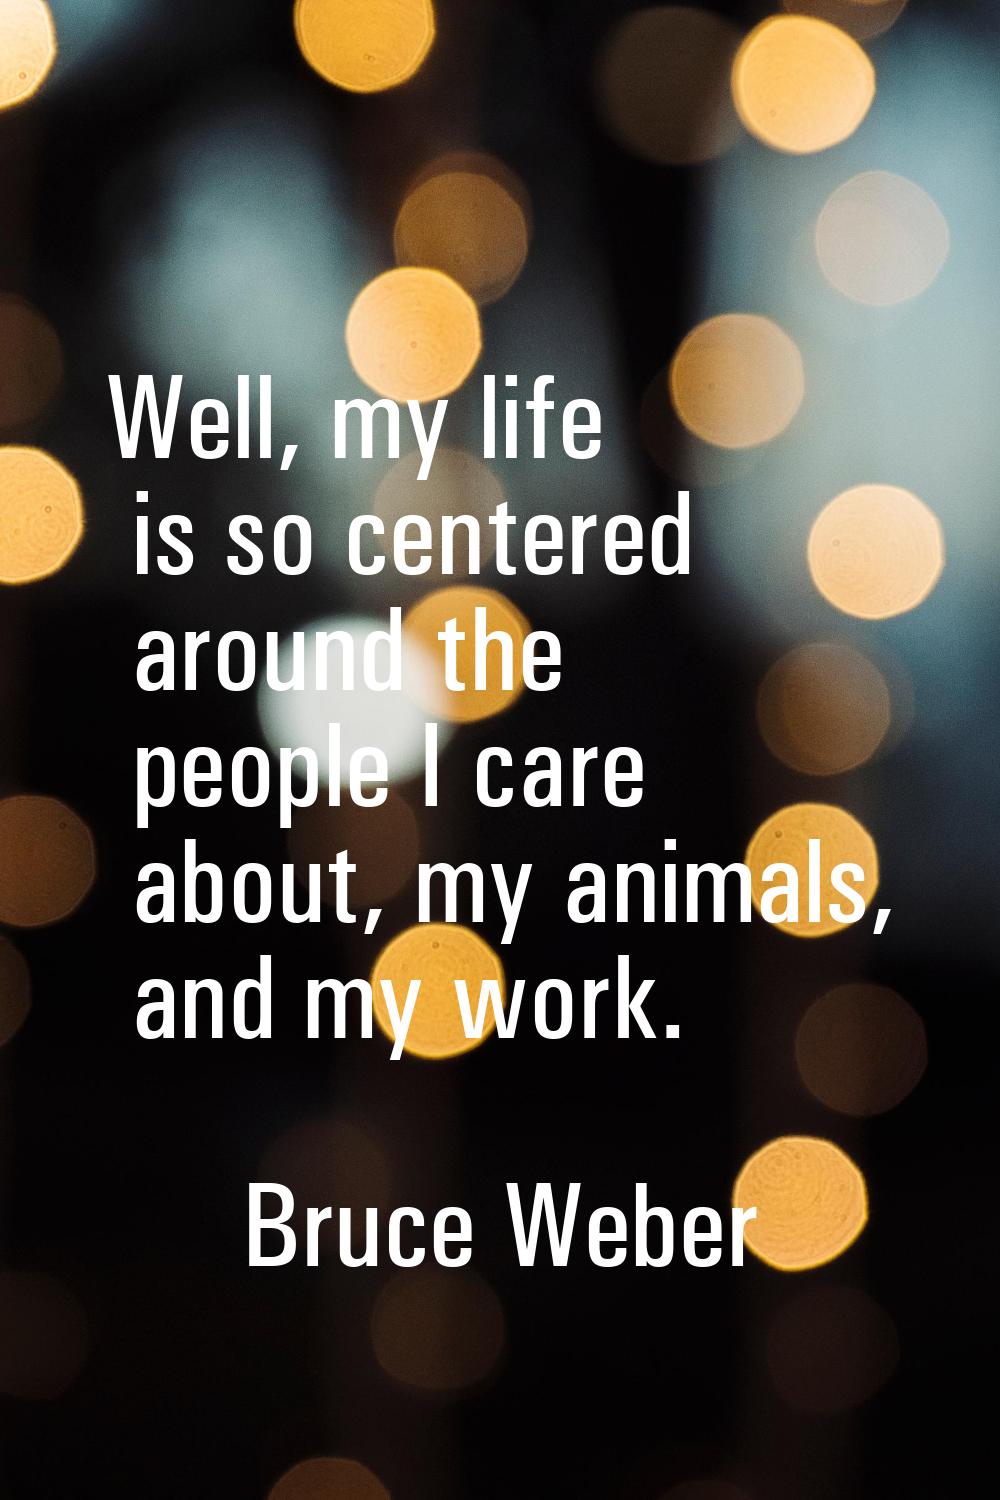 Well, my life is so centered around the people I care about, my animals, and my work.